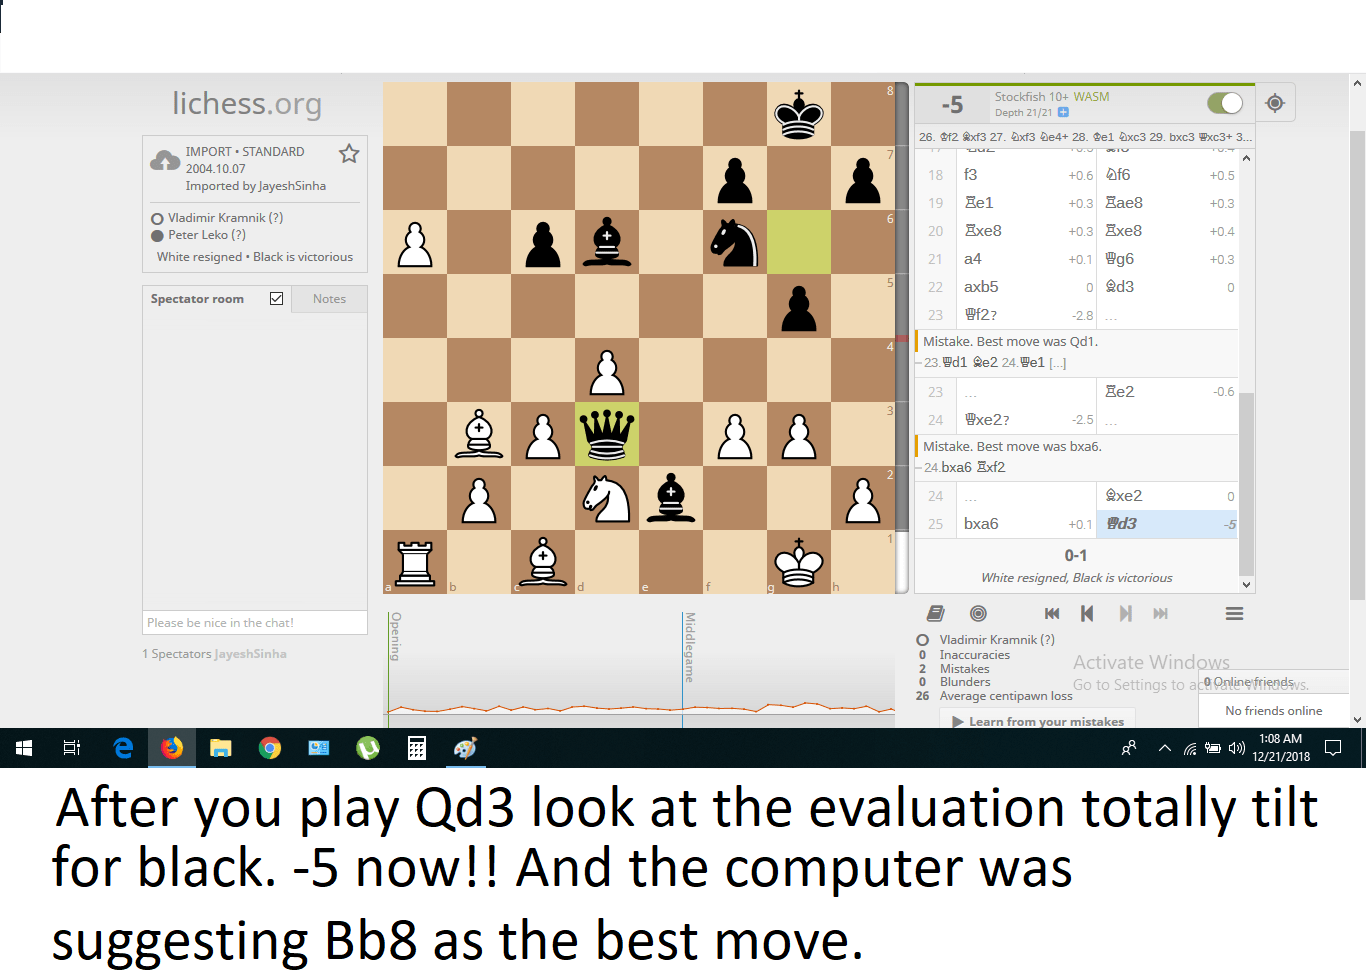 Trouble inserting chess analysis diagrams into vote chess - Chess Forums 